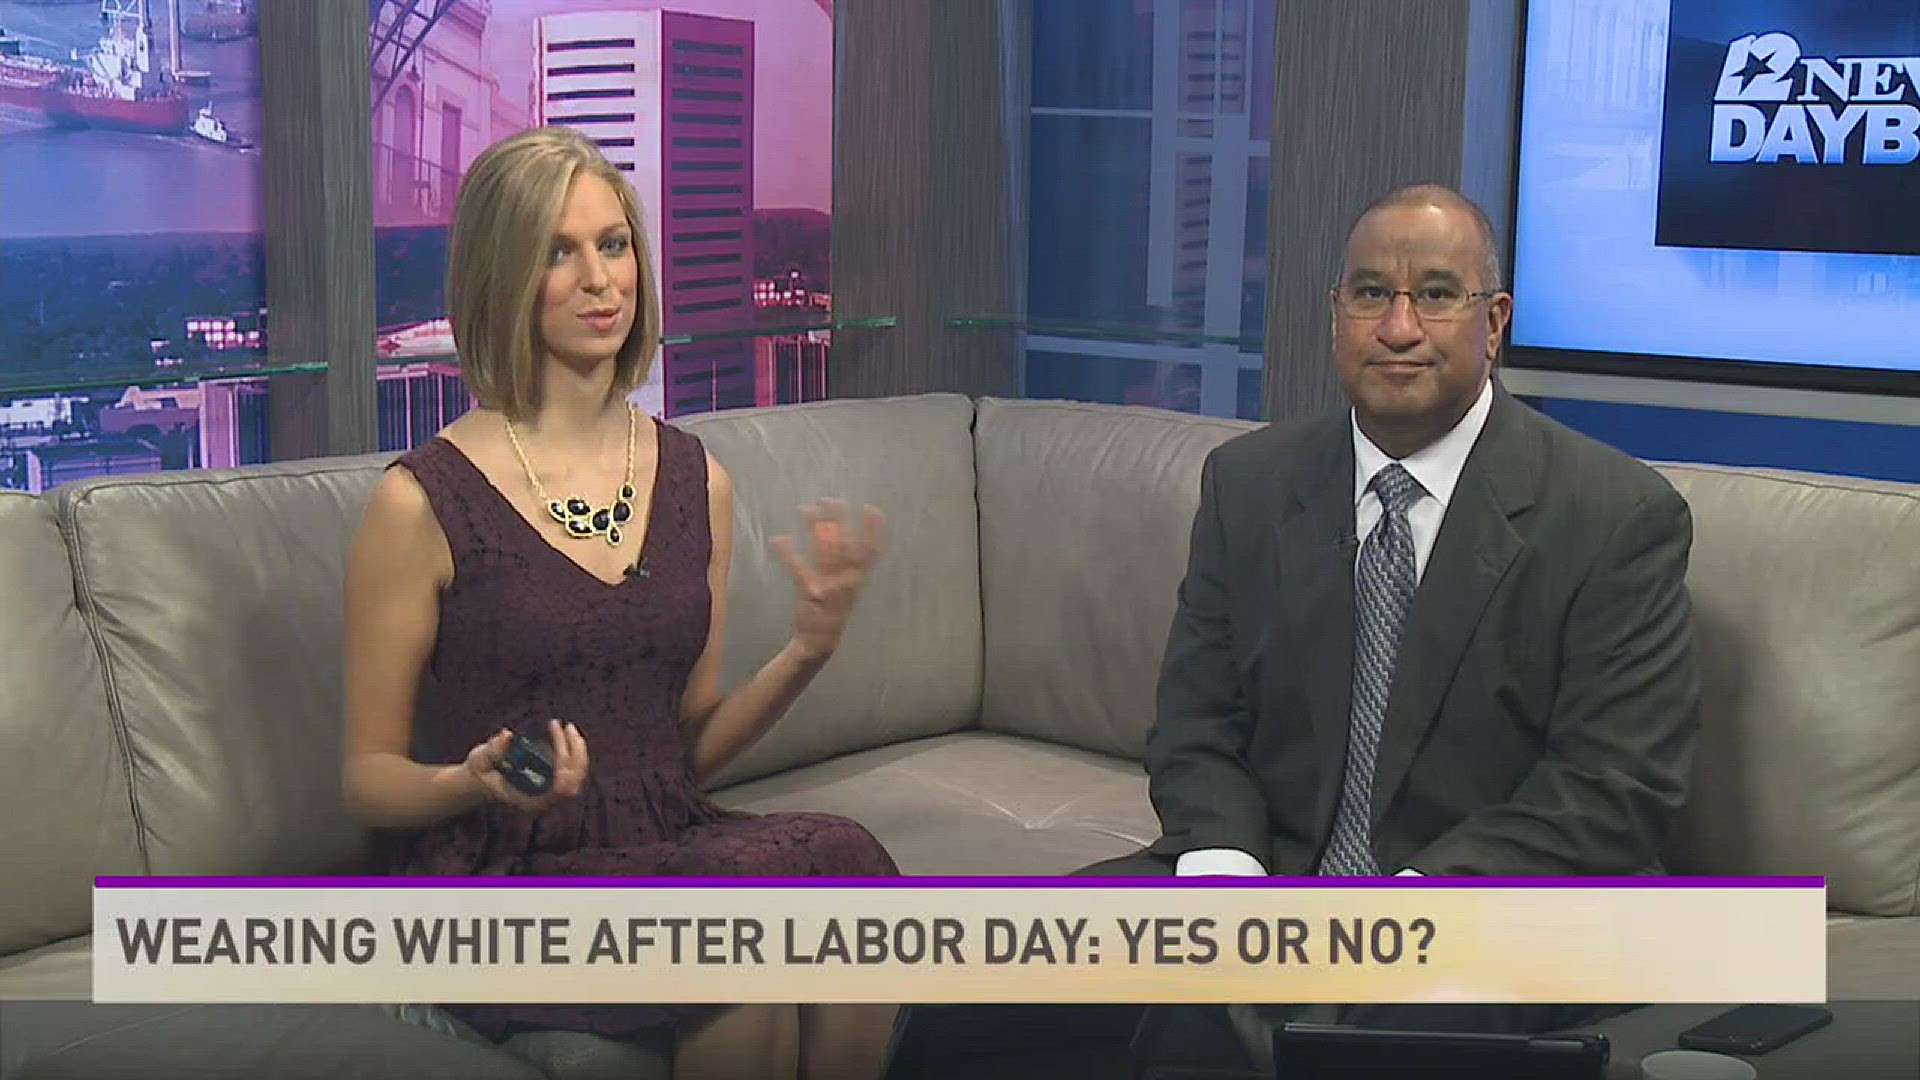 It's an old-saying that you don't wear white after Labor Day, but does that still apply today? Do you think it's acceptable to wear white after the holiday?